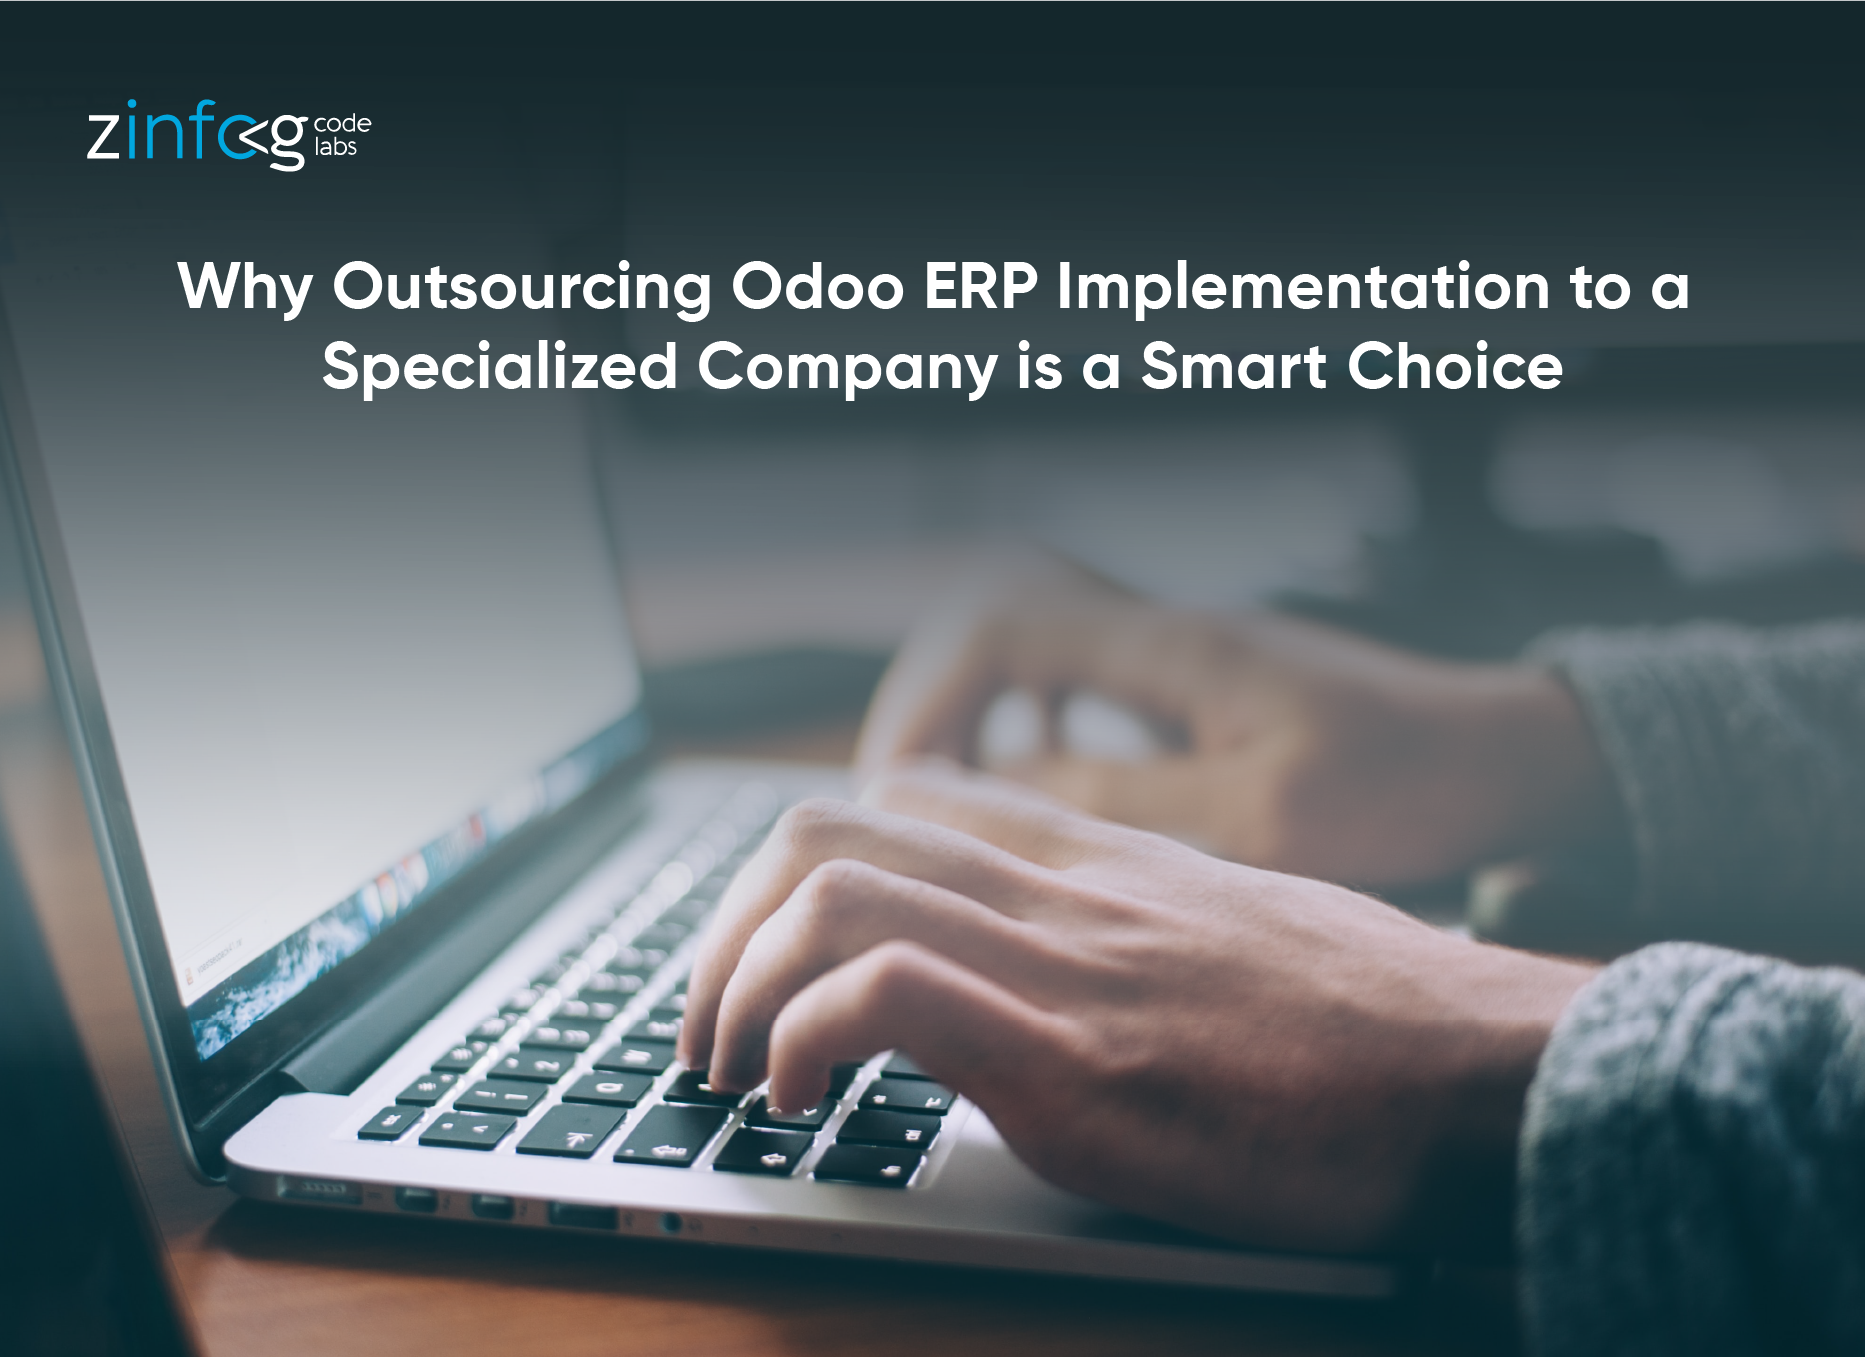 why-outsourcing-odoo-erp-implementation-to-a-specialized-company-is-a-smart-choice.html